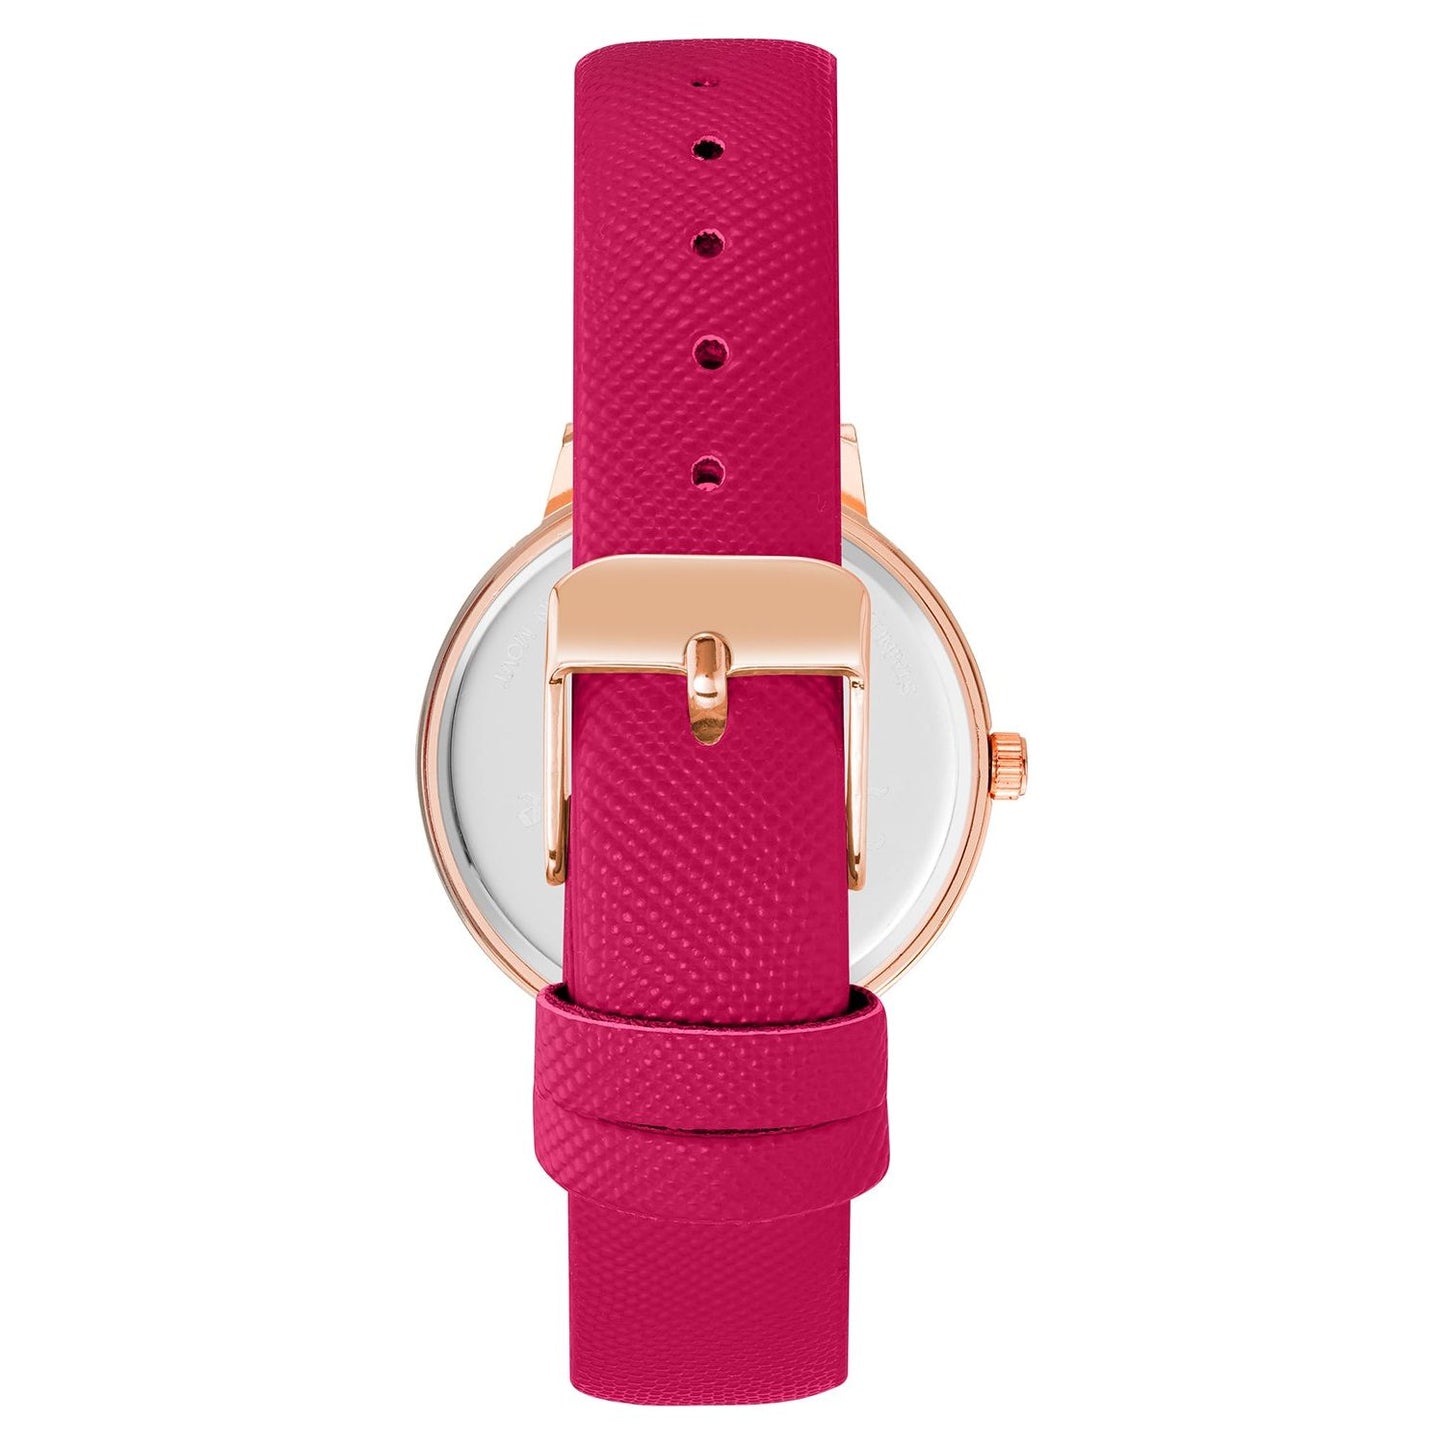 JUICY COUTURE JUICY COUTURE MOD. JC_1264RGHP WATCHES juicy-couture-mod-jc_1264rghp